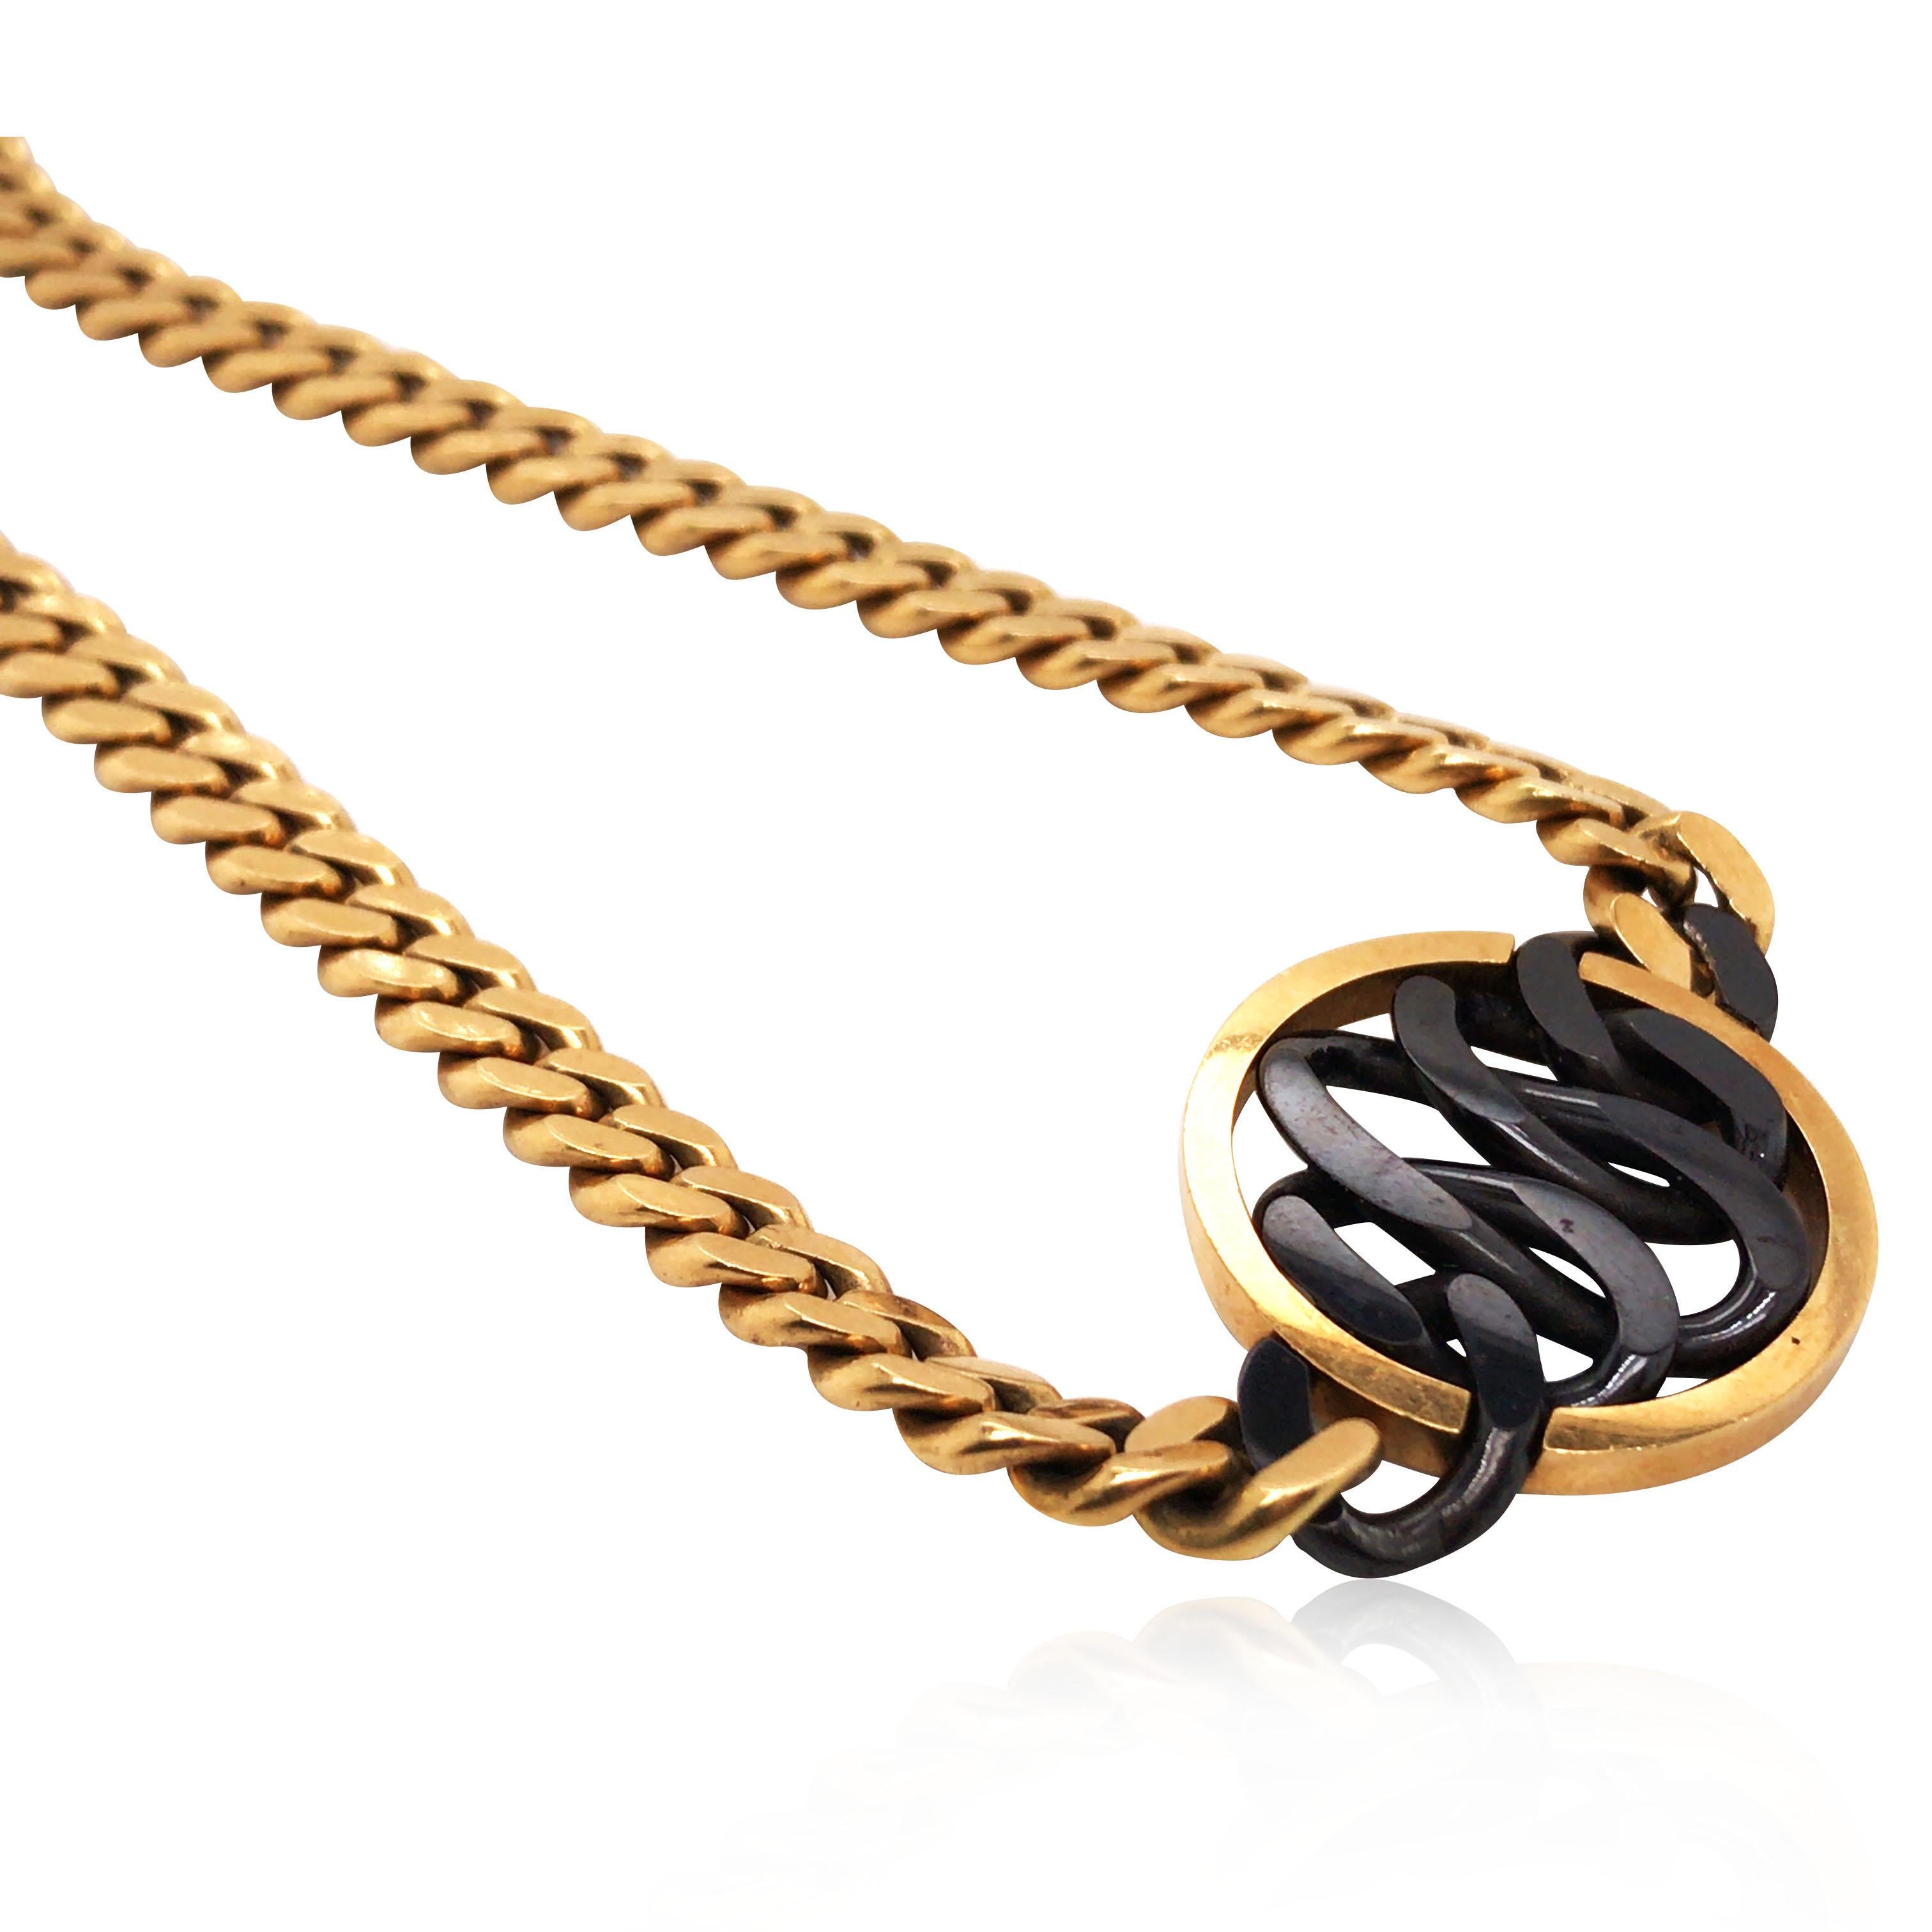 This Bvlgari Onyx necklace has the structure of intertwining circles. The Onyx circles are contained in a round gold circle in the center.

Weight: 55.8 grams
Measurement: 38 cm in length
Stamp: 